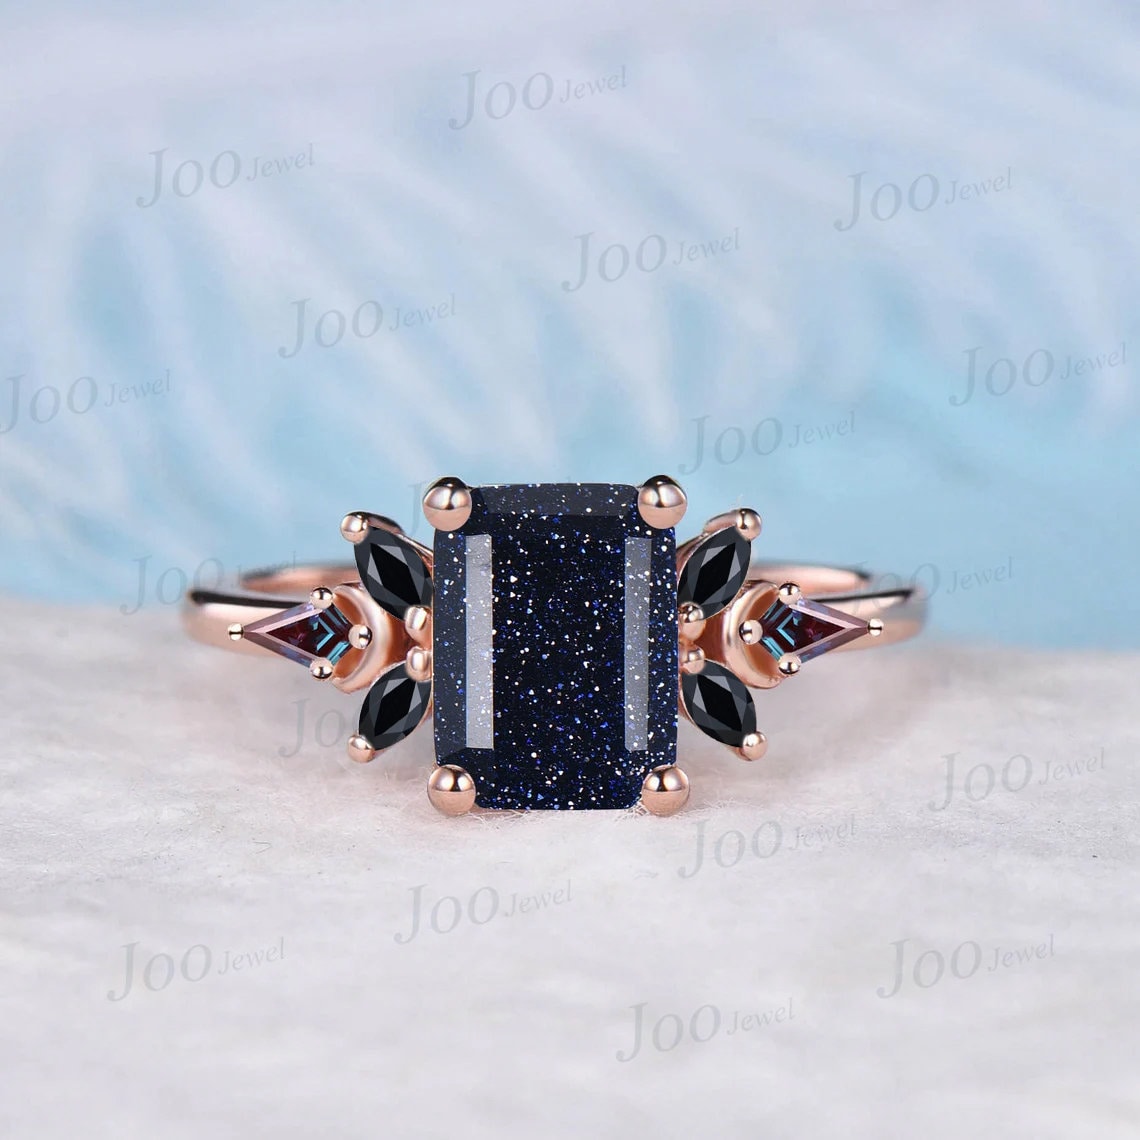 2ct Emerald Cut Galaxy Blue Sandstone Engagement Ring Black Spinel Gemstone Vintage Cluster Kite Alexandrite Ring Personalized Gifts Women